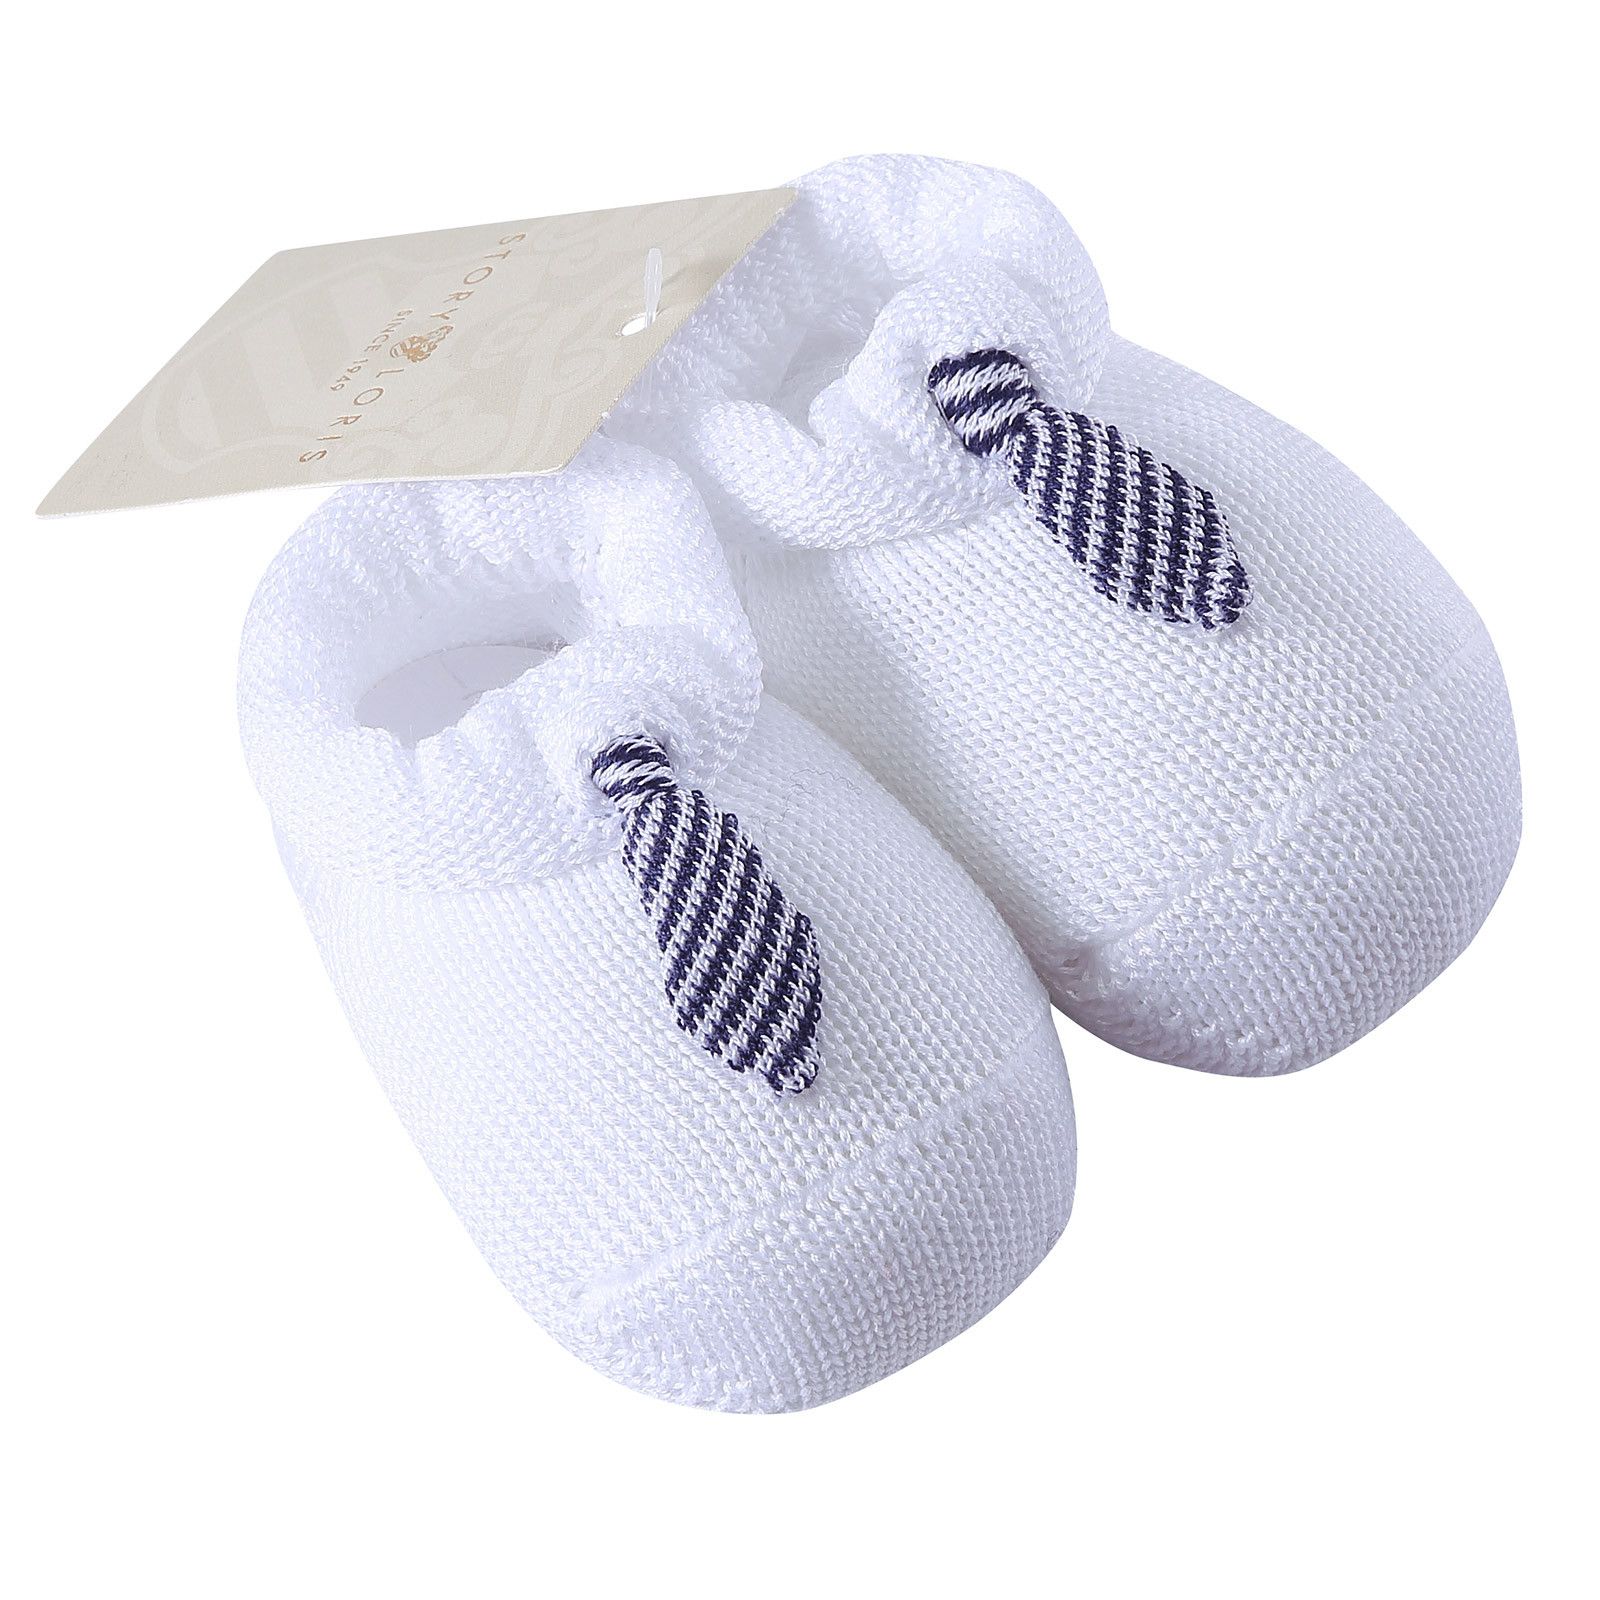 Baby White Knitted Cotton Shoes With Blue Tie Trims - CÉMAROSE | Children's Fashion Store - 2